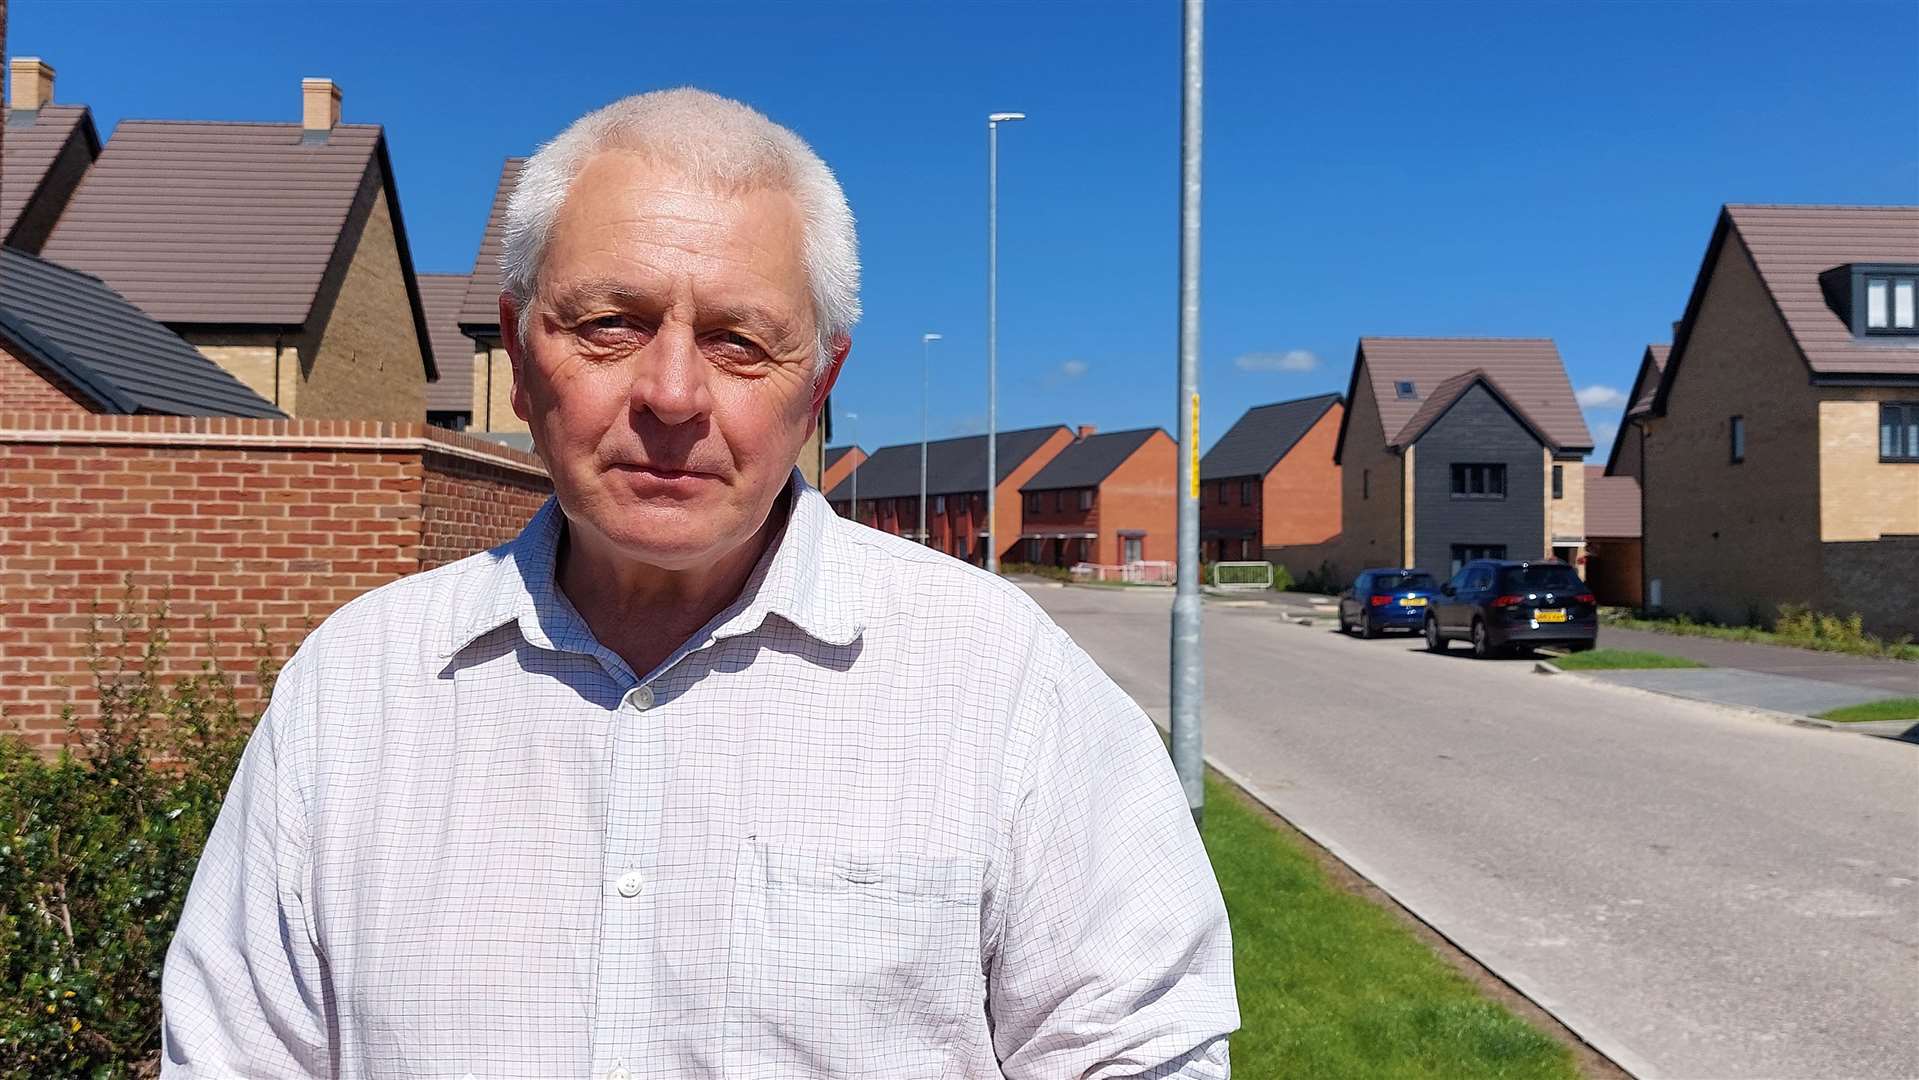 KCC is consulting on plans to close Finn Farm Road from the junction with Brockmans Lane and Rutledge Avenue. Ashford Independents councillor Ray McGeever is pictured standing in Heritage Lane, where traffic will be diverted through